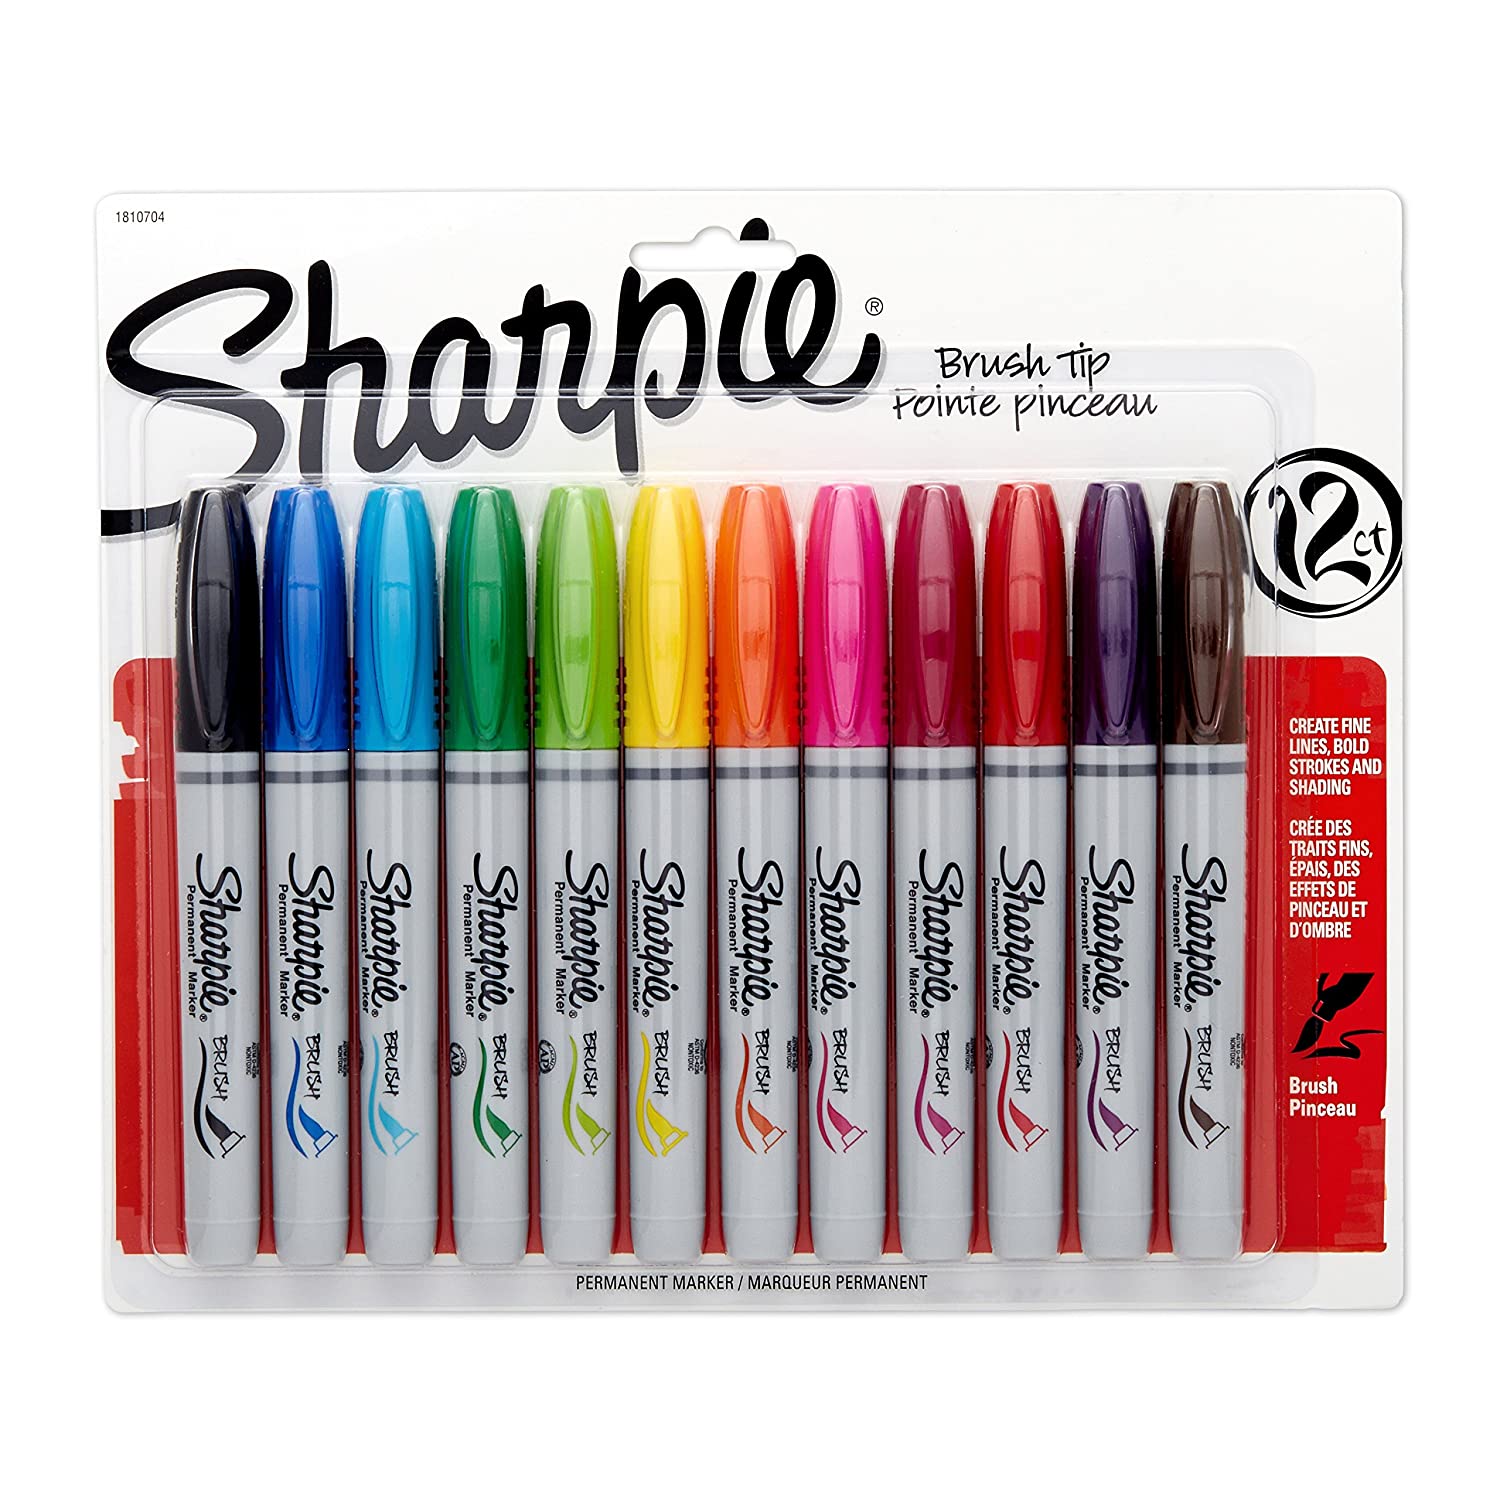 Sharpie Brush-Tip Permanent Markers, Assorted Colors (1810704)(Pack of 12)